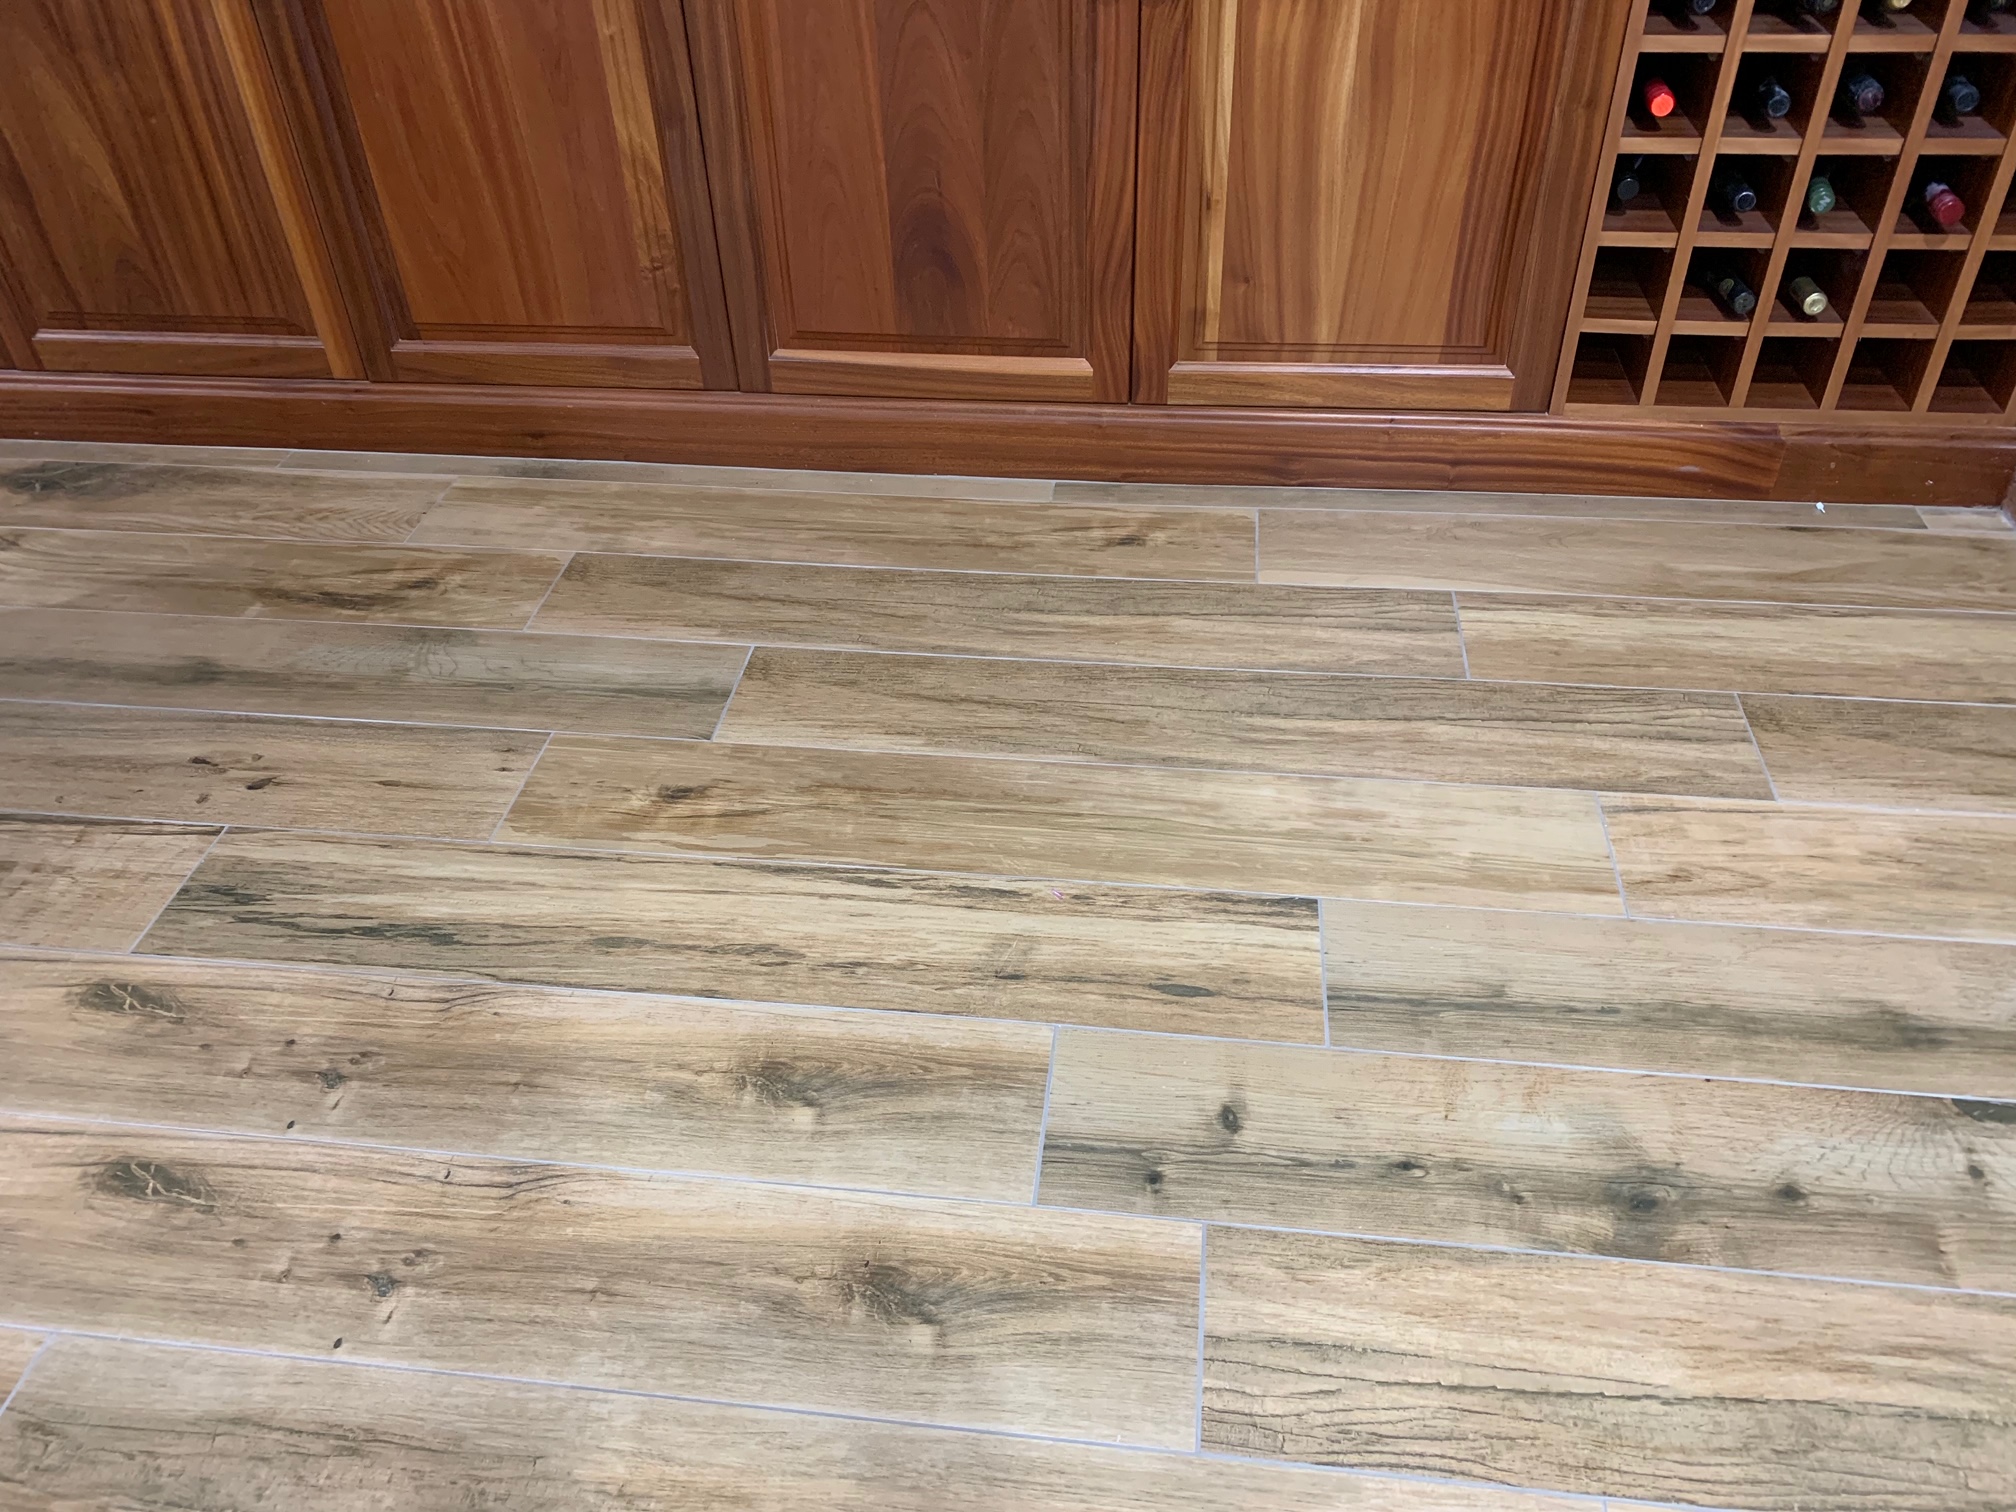 Natural wooden floor with undertile heating